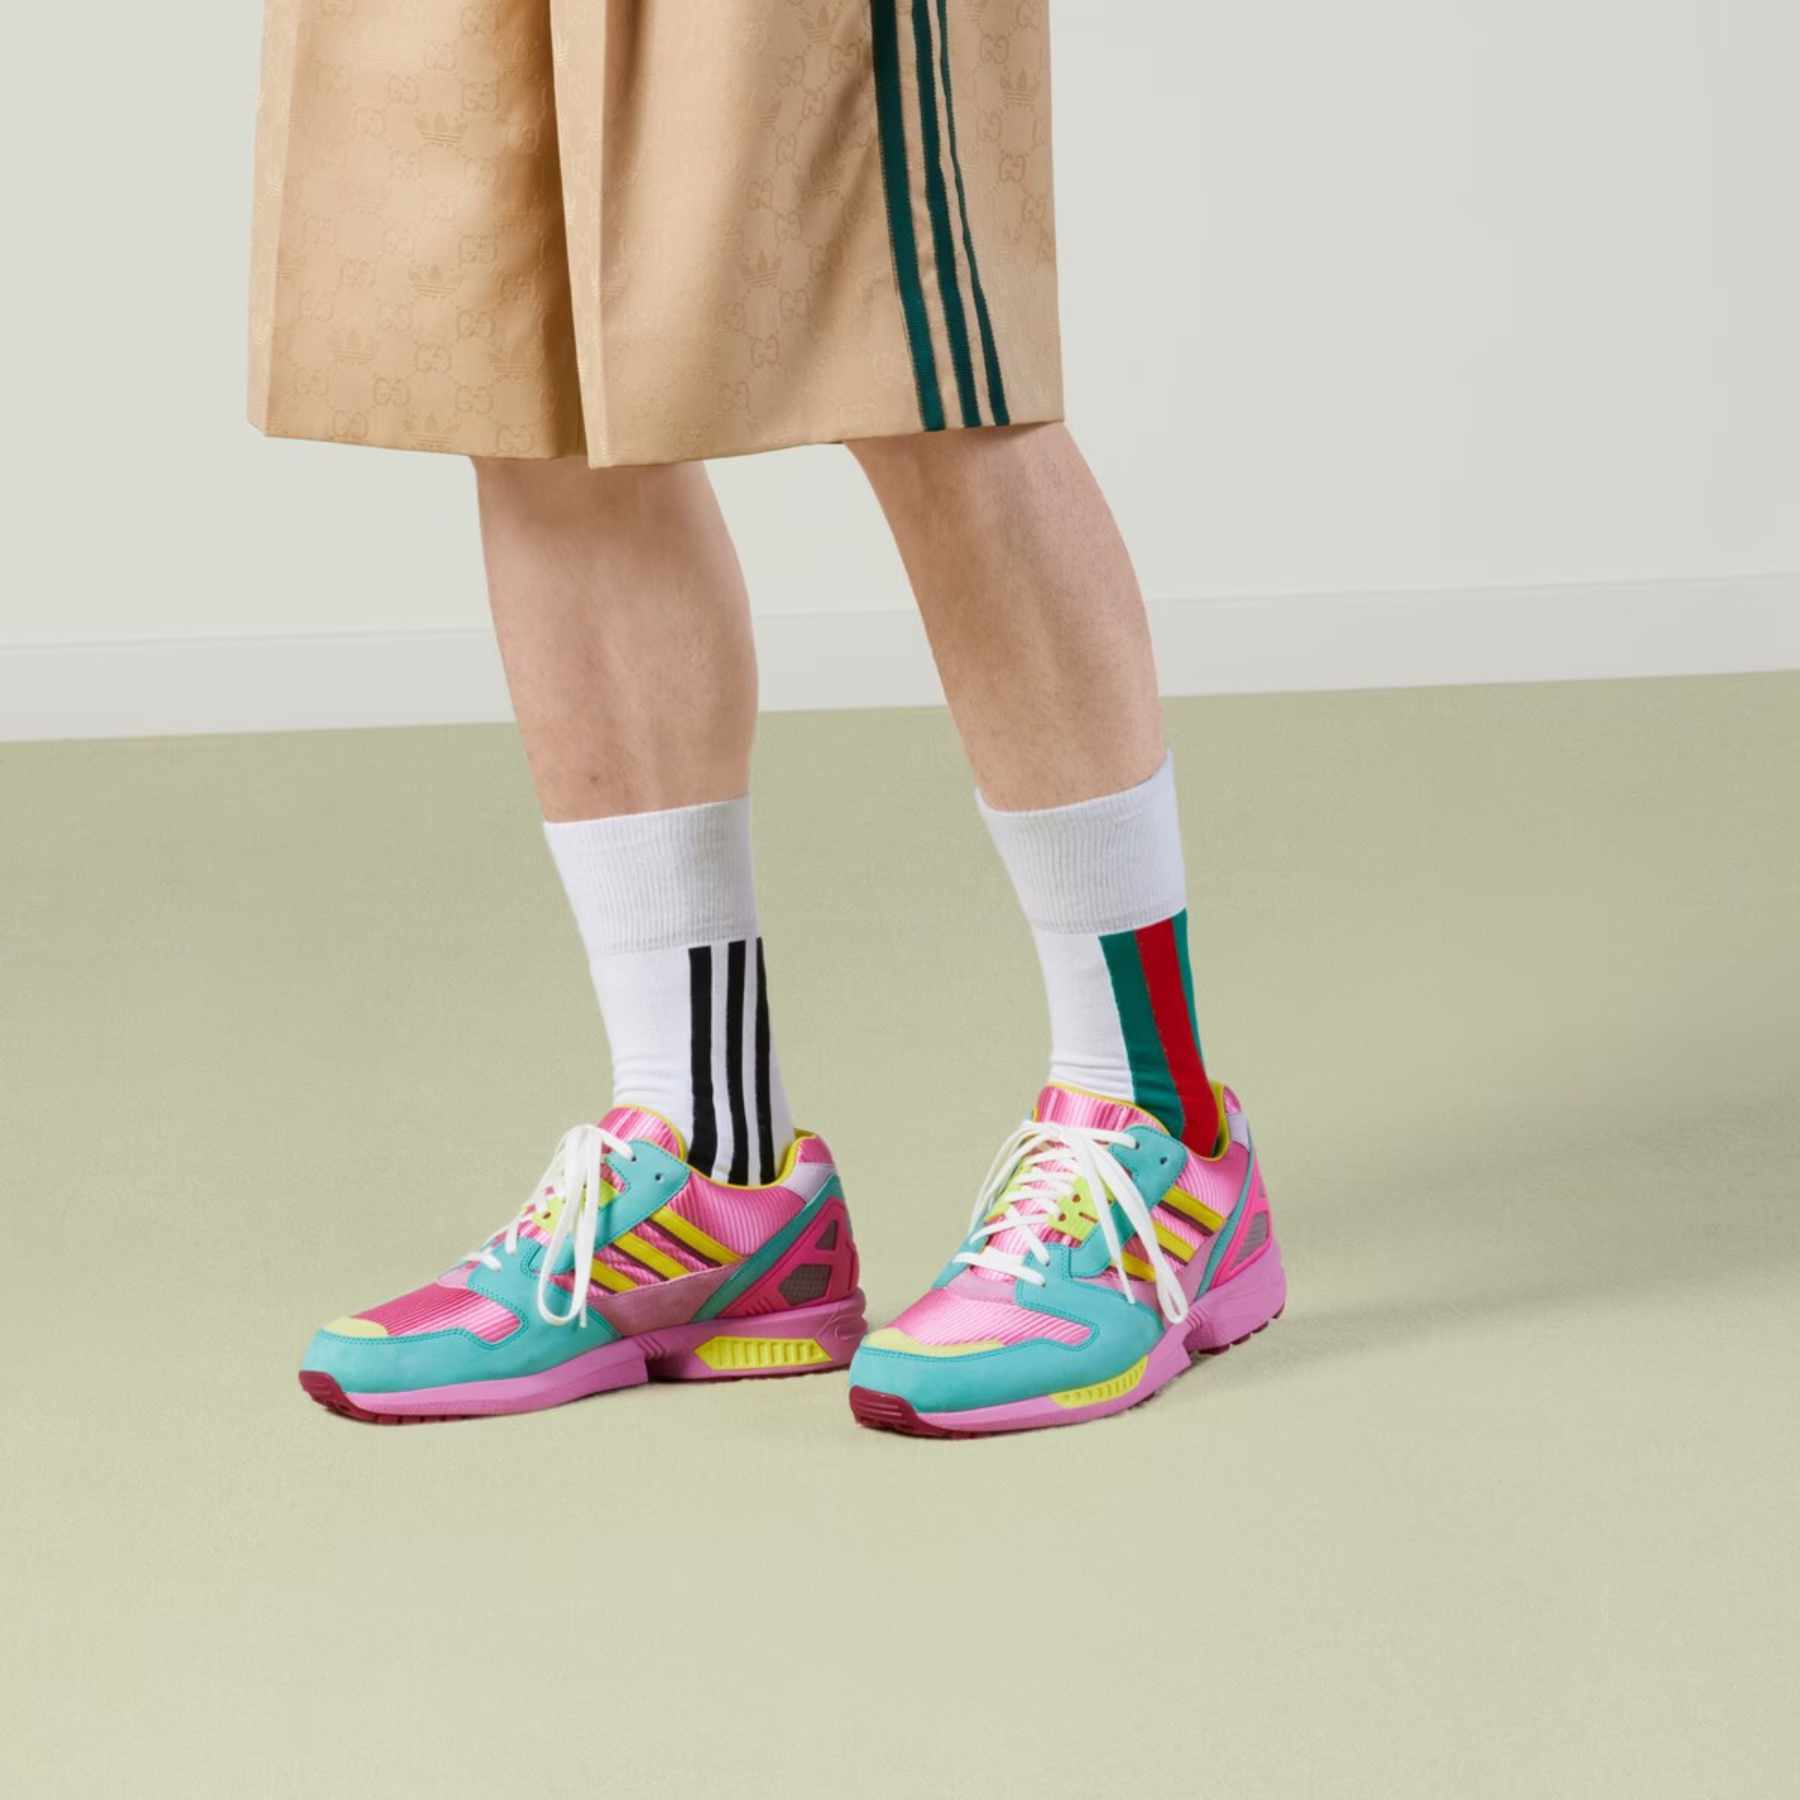 Got A Spare $28,000? Adidas x Gucci Have Dropped A Not-So-Humble